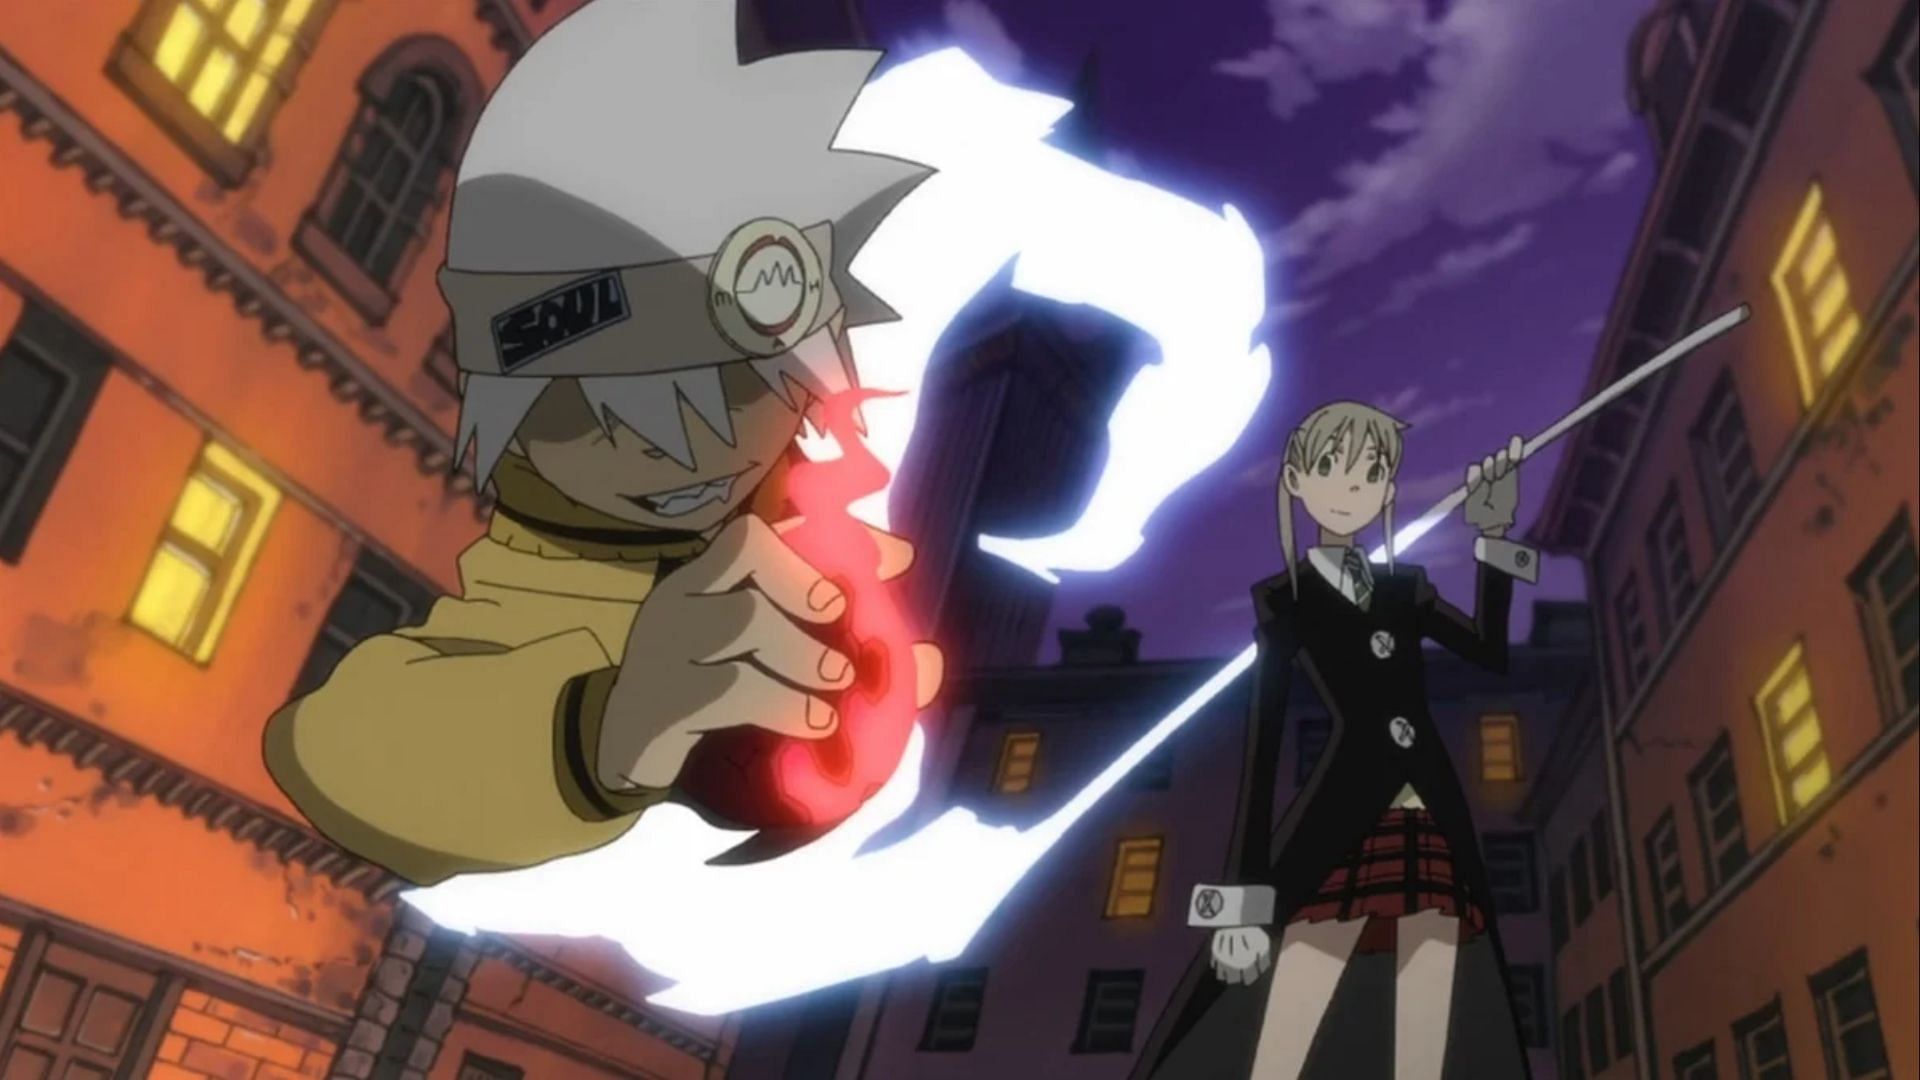 Soul Eater Anime gets a remake that follows the Manga!! 